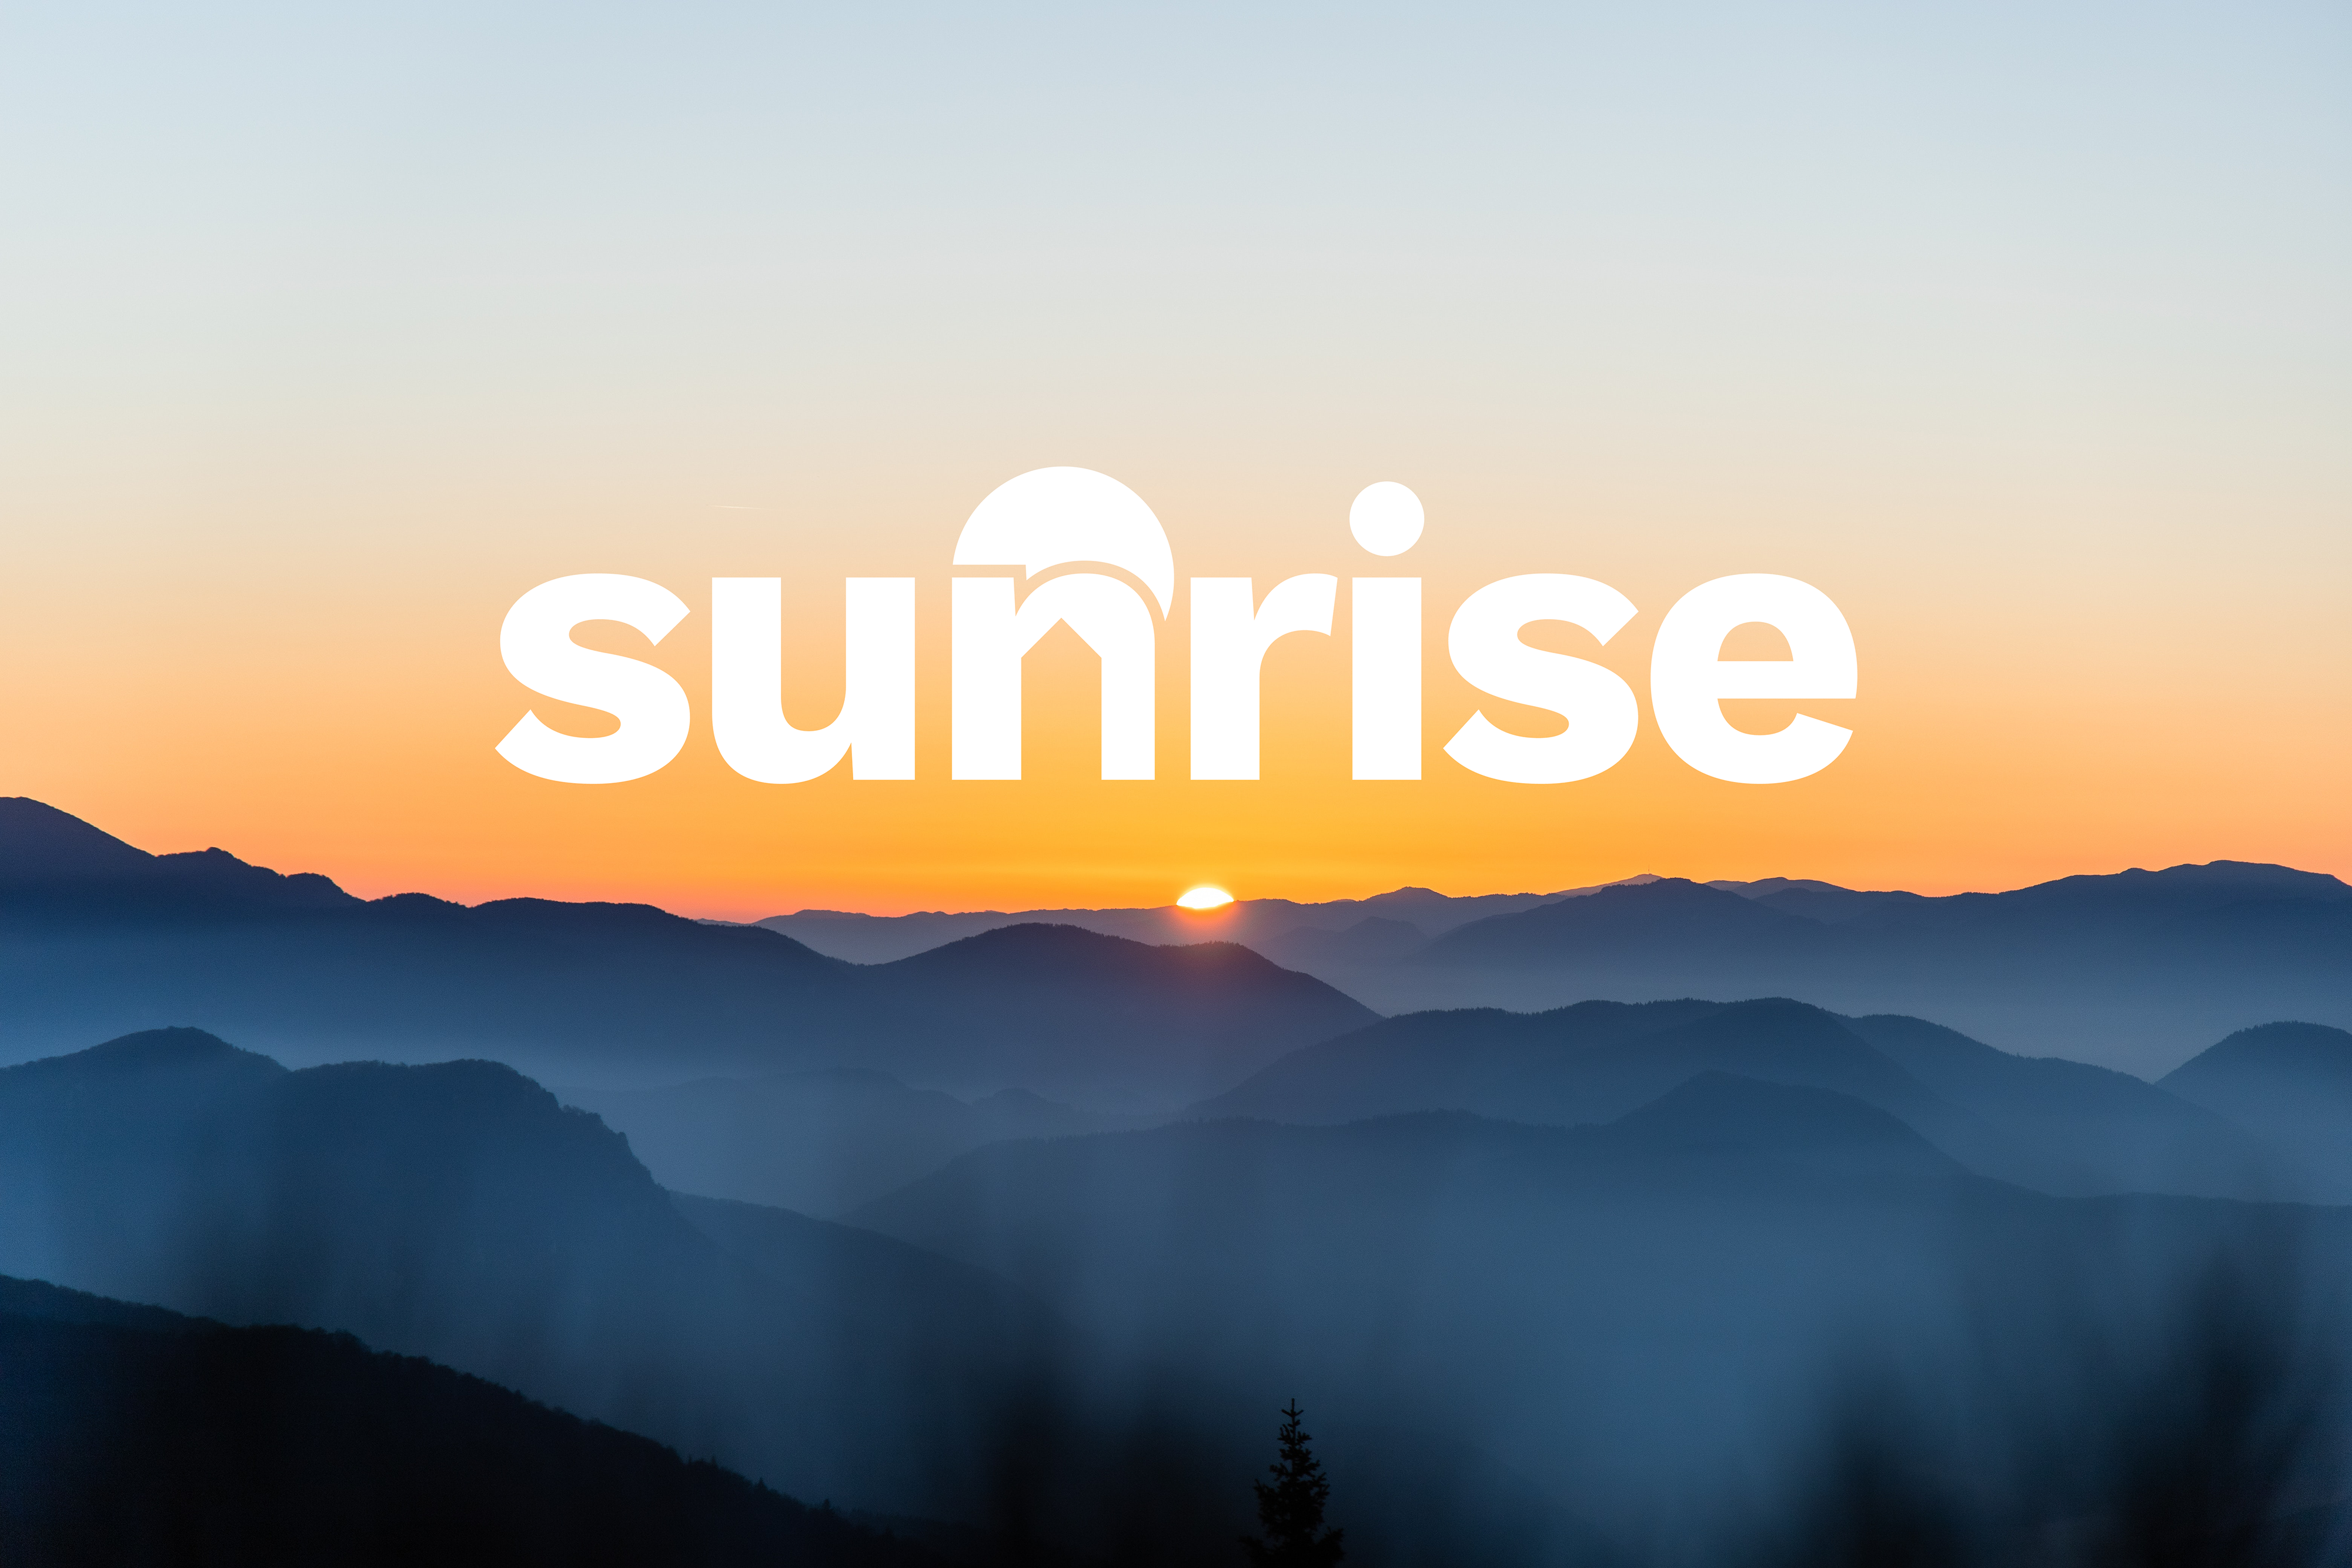 SUNRISE selected as case study for OECD report on transdisciplinary research